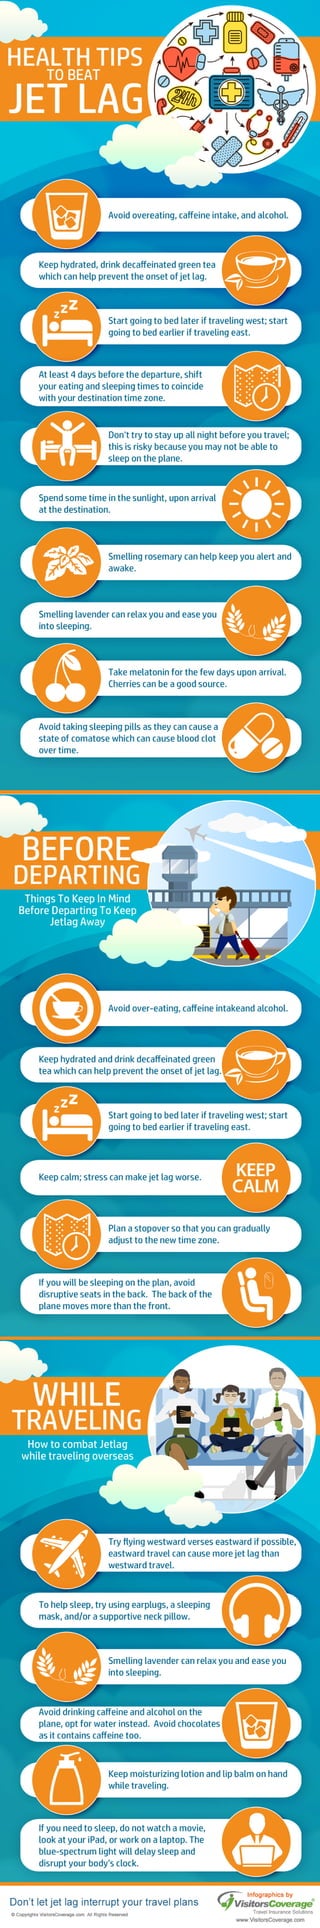 Tips to Avoid and Prevent Jet Lag